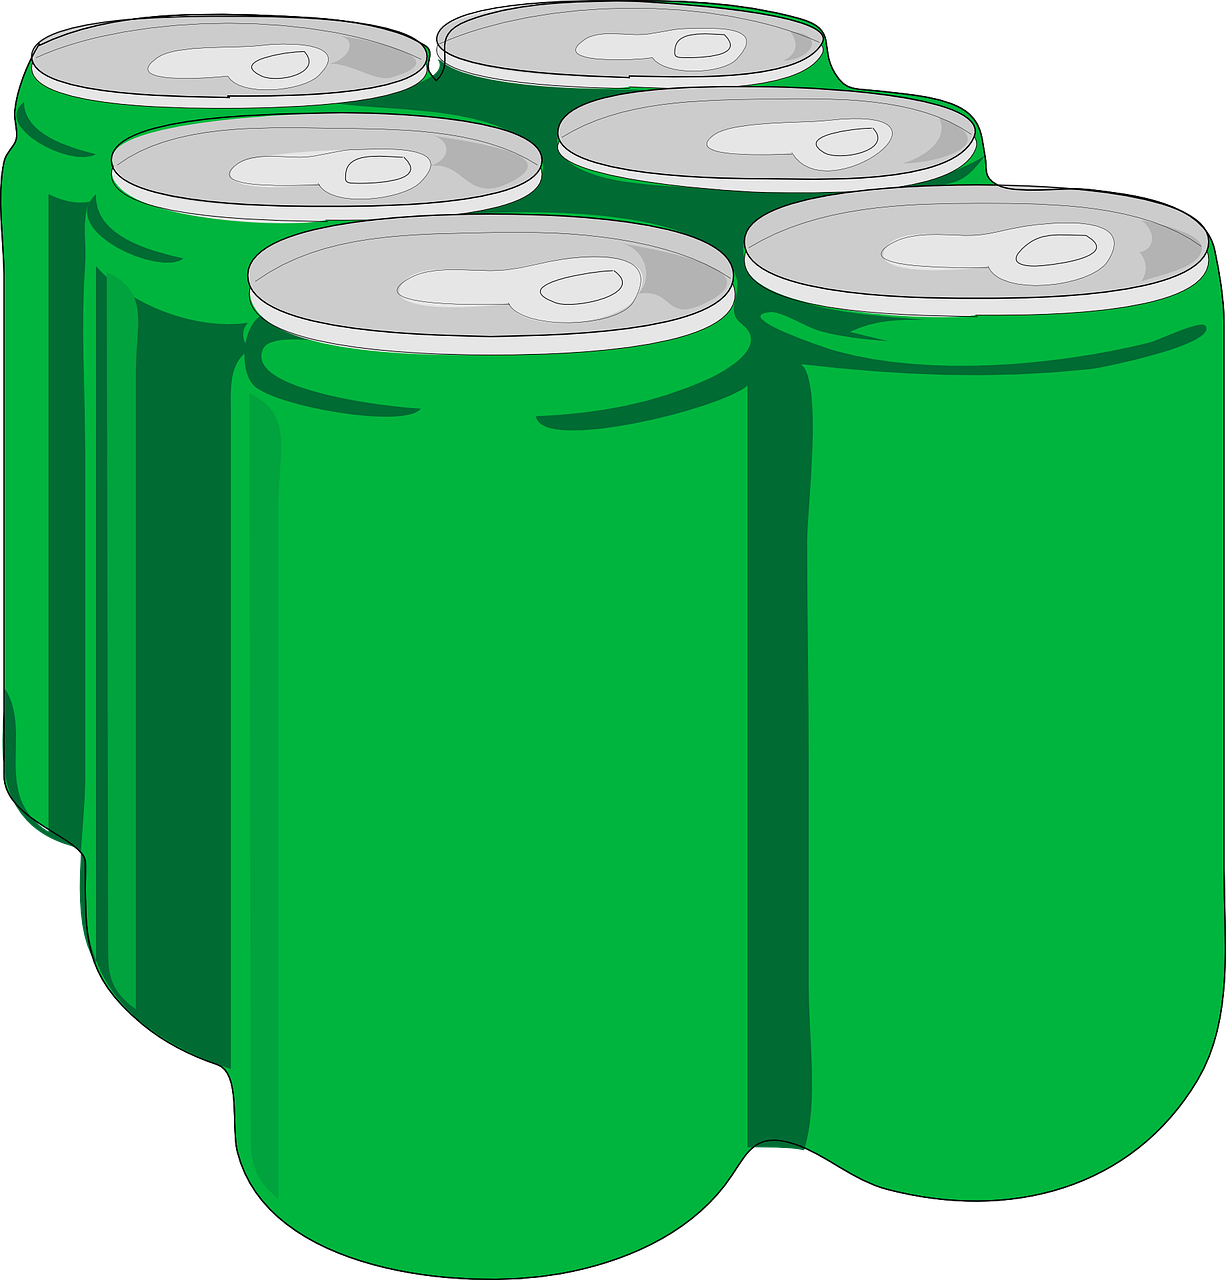 beverage soda cans free photo